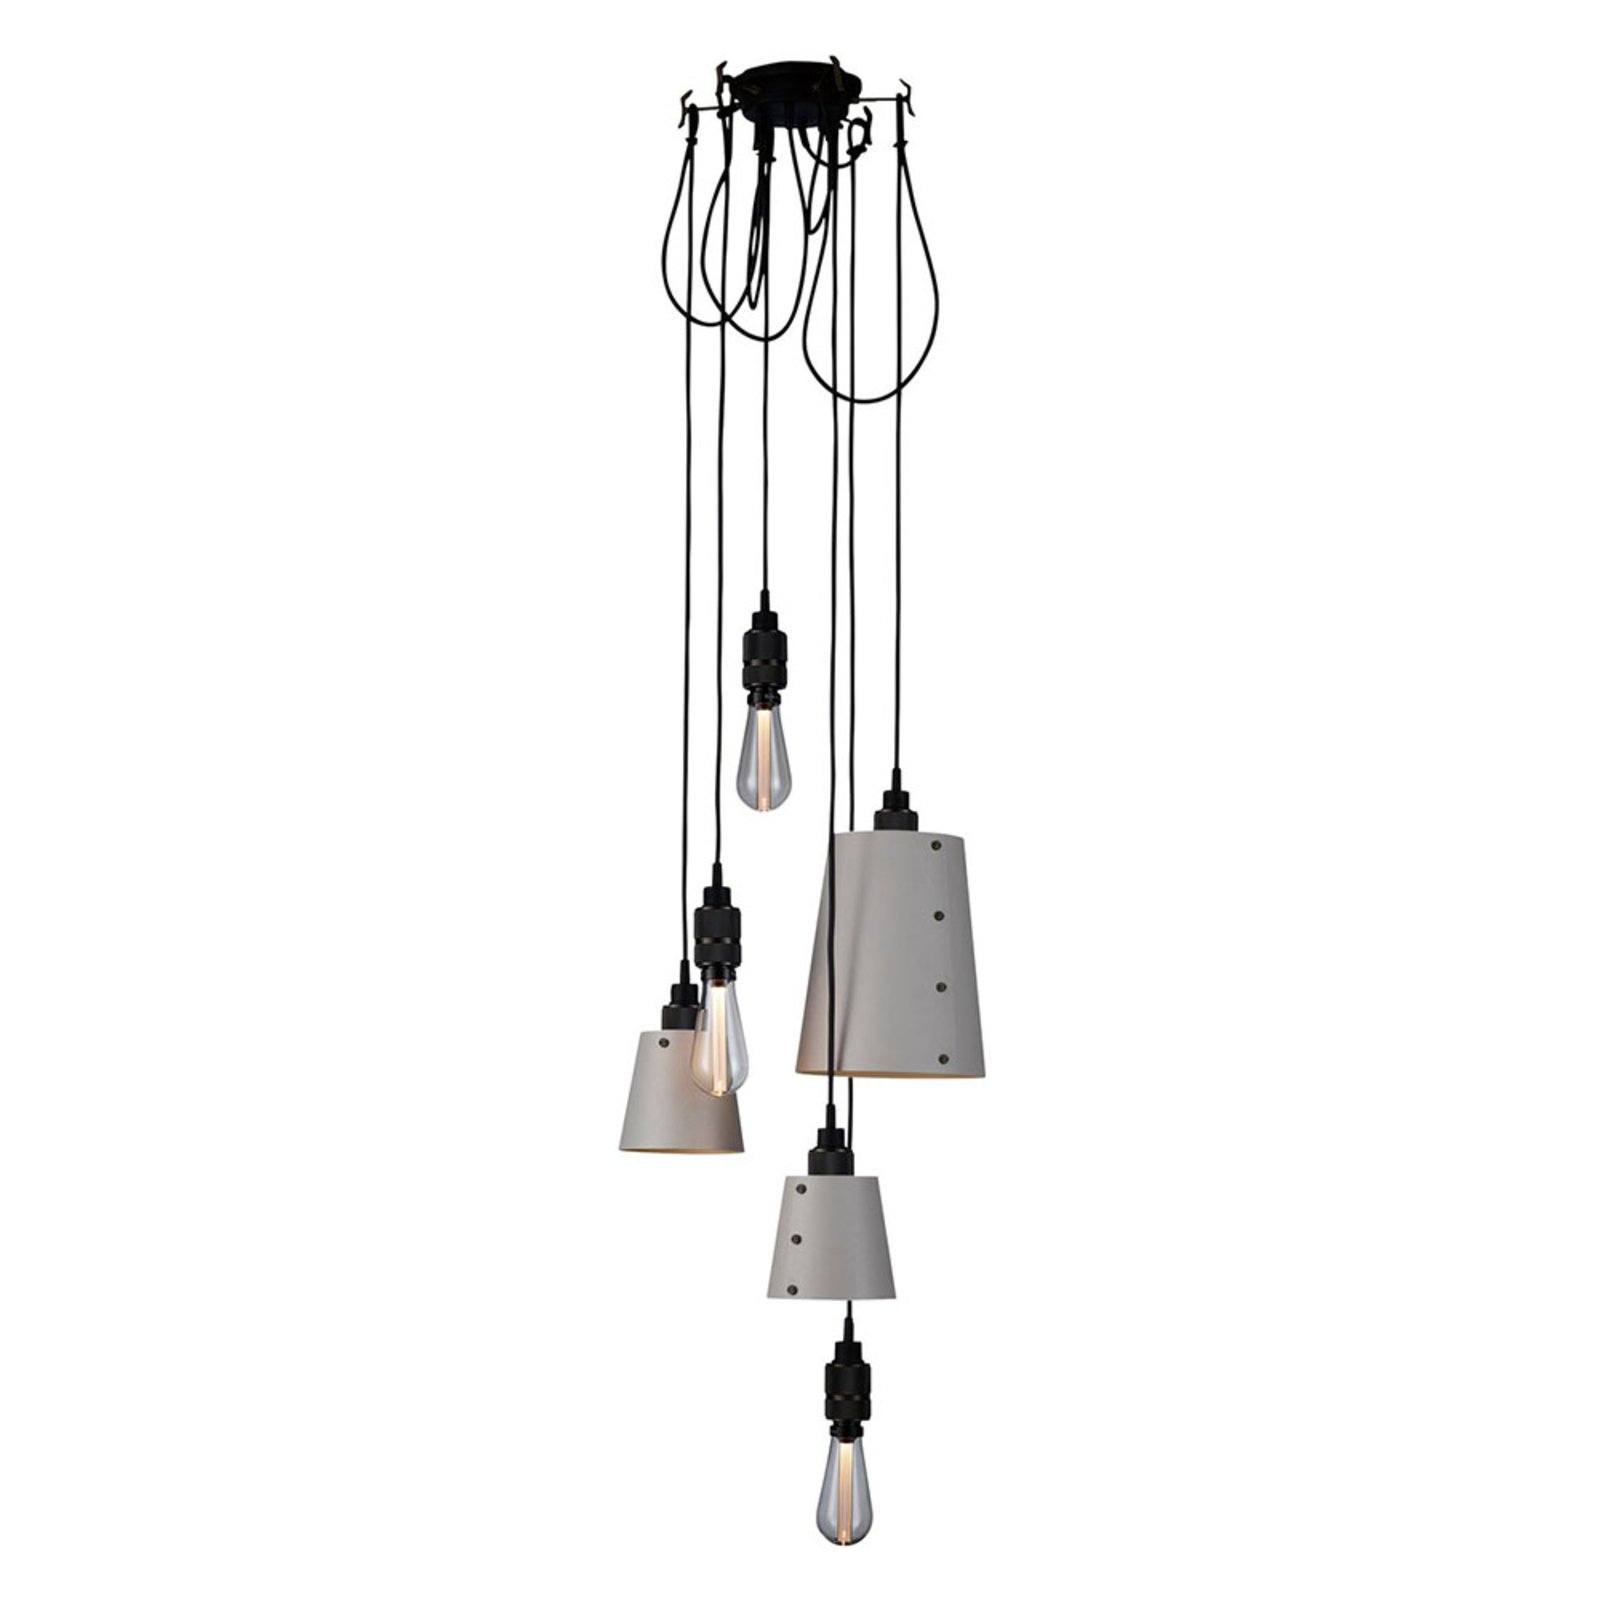 Buster + Punch Hooked 6.0 mix gris/bronce